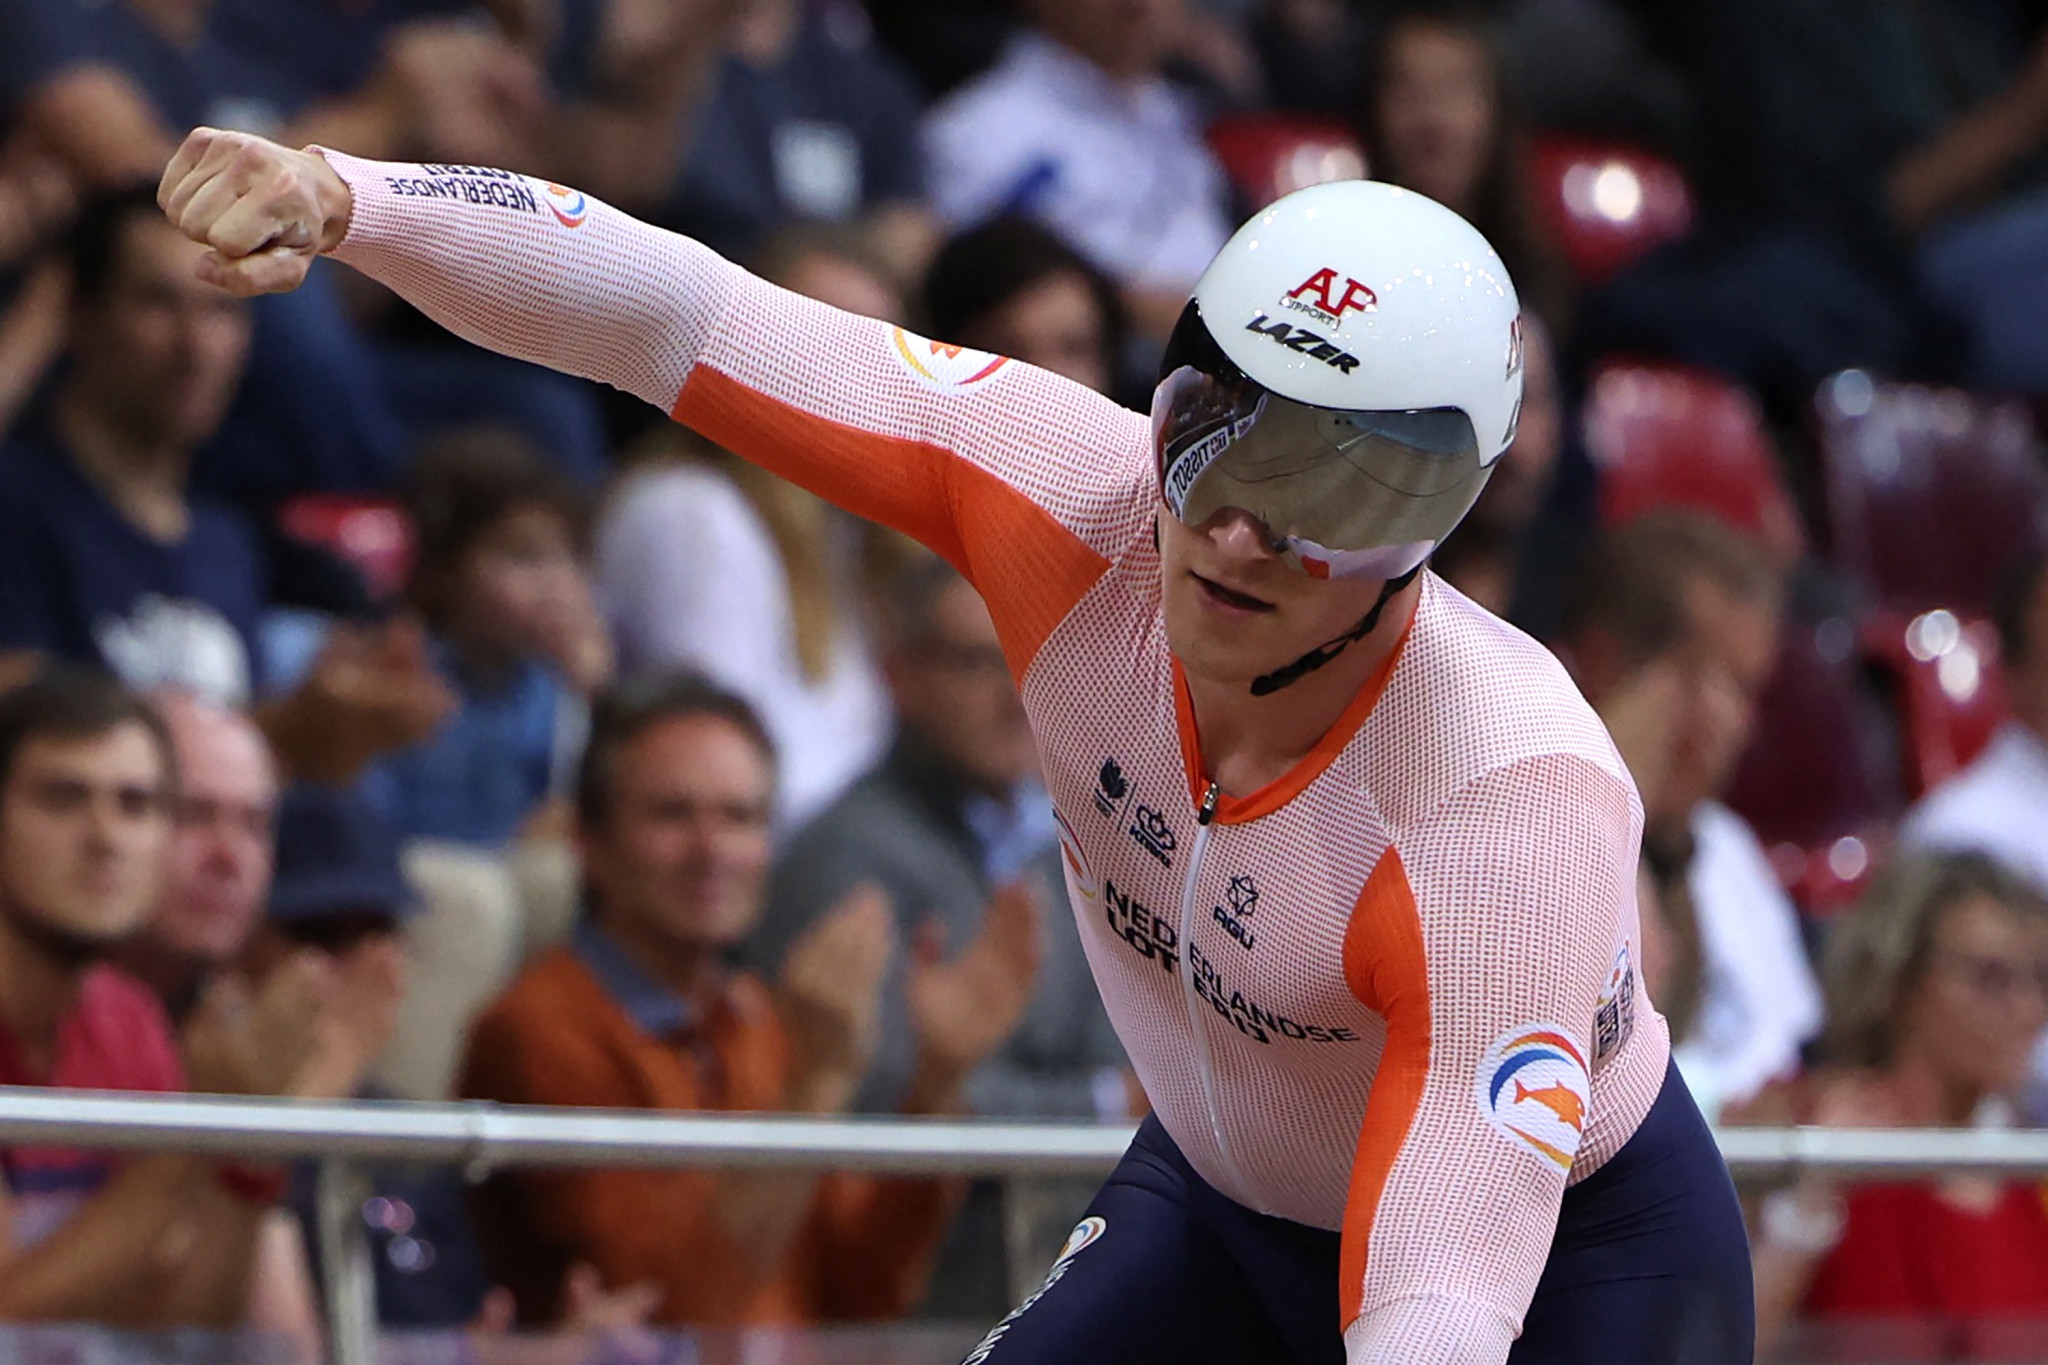 The Netherlands and Germany win team sprint golds at European Track Cycling Championships